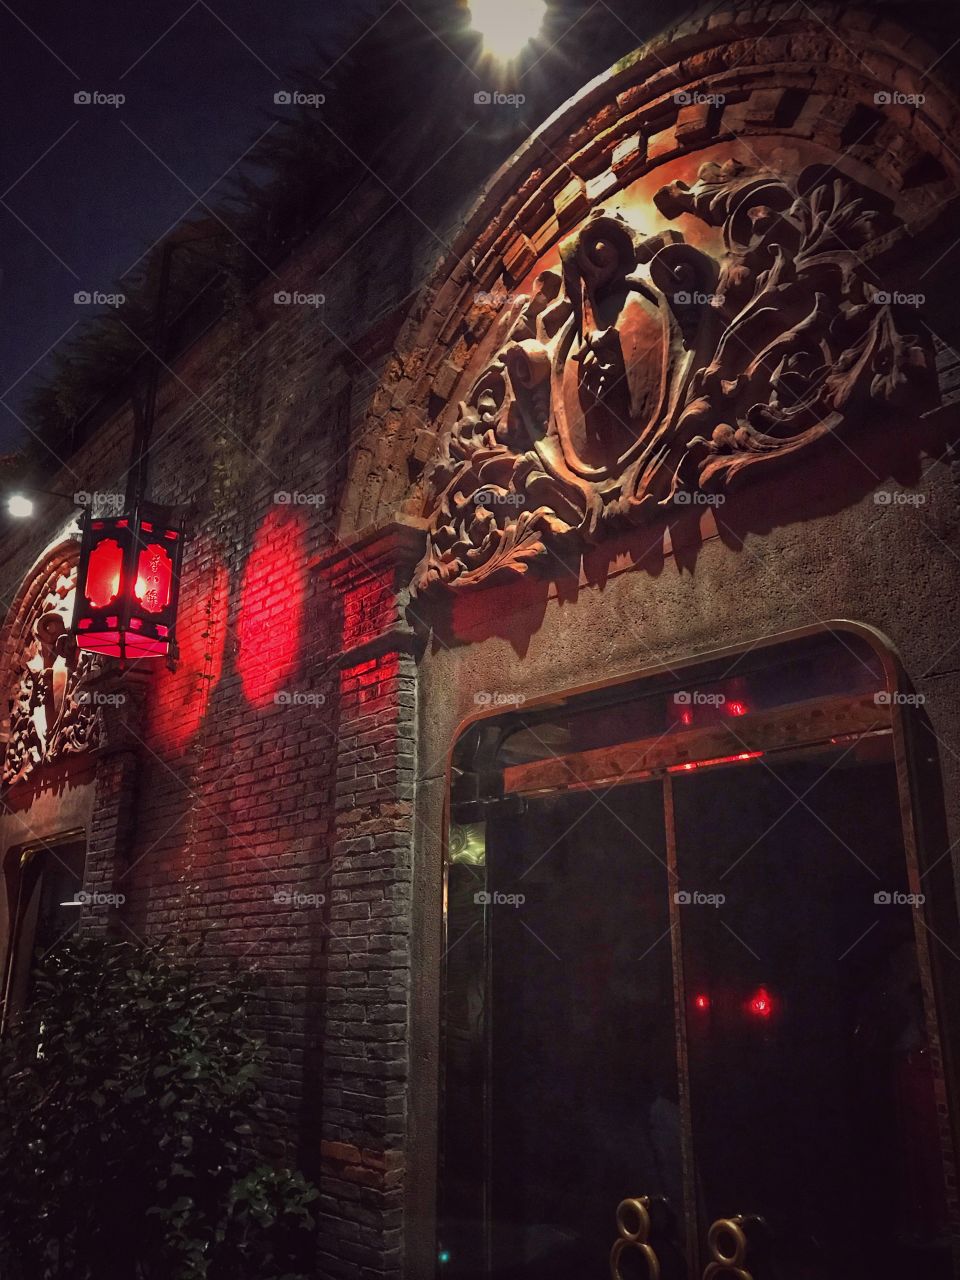 Red lantern and a restaurant door - combining the artsy and neat into an interesting environment at Xintiandi 